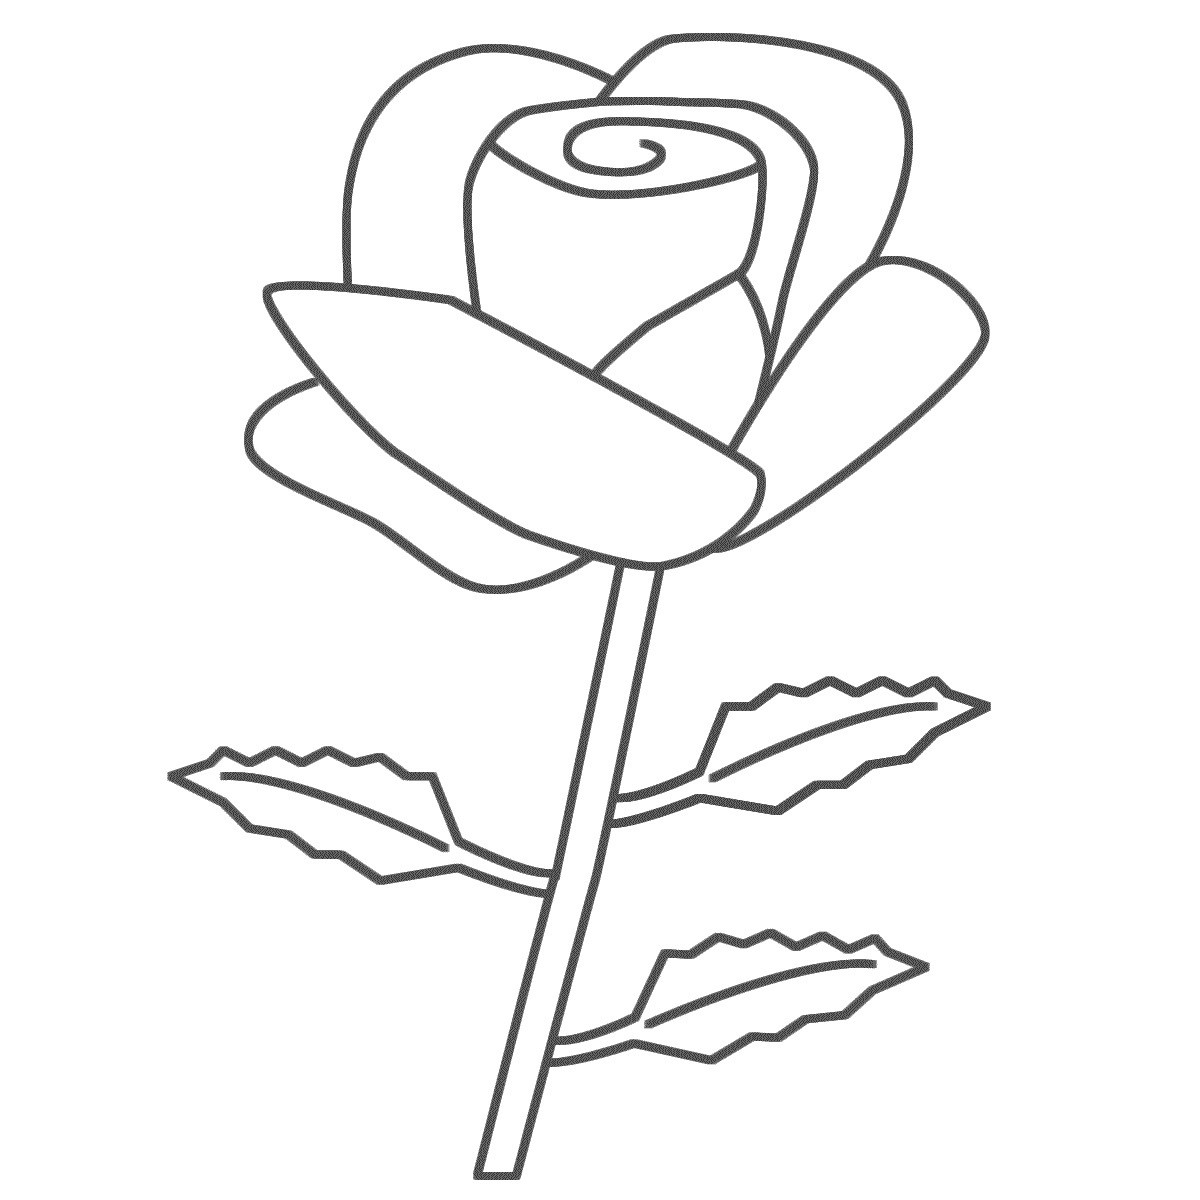 Preschool Coloring Sheets Roses
 Free Printable Roses Coloring Pages For Kids